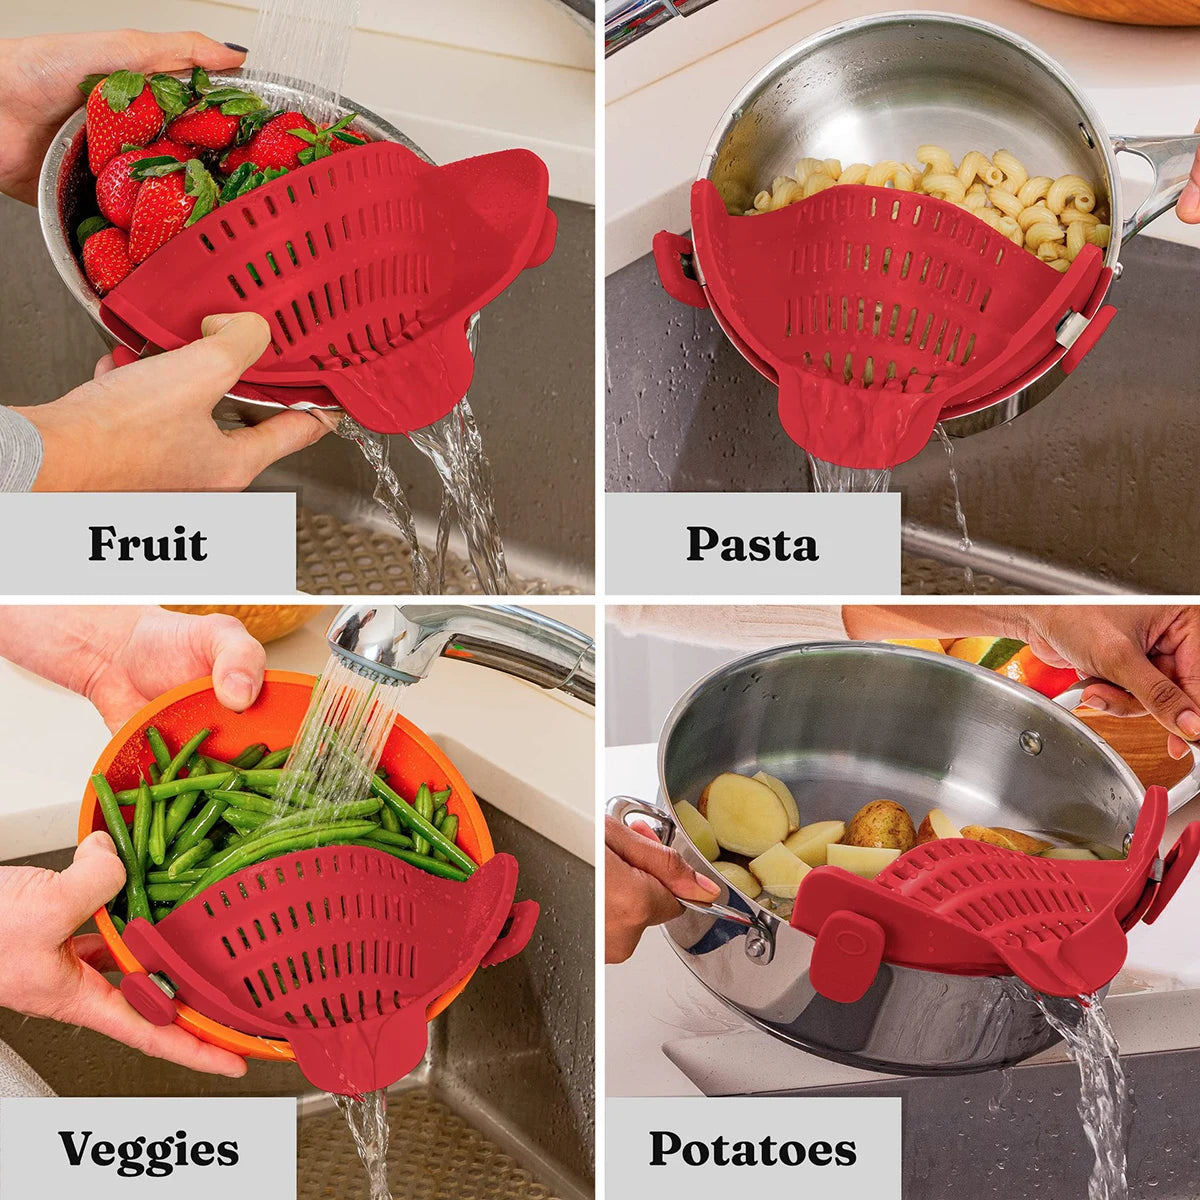 Silicone Kitchen Gadgets Strainer Clip Pan Drain Rack Bowl Funnel Rice Pasta Vegetable Washing Colander Draining Excess Liquid